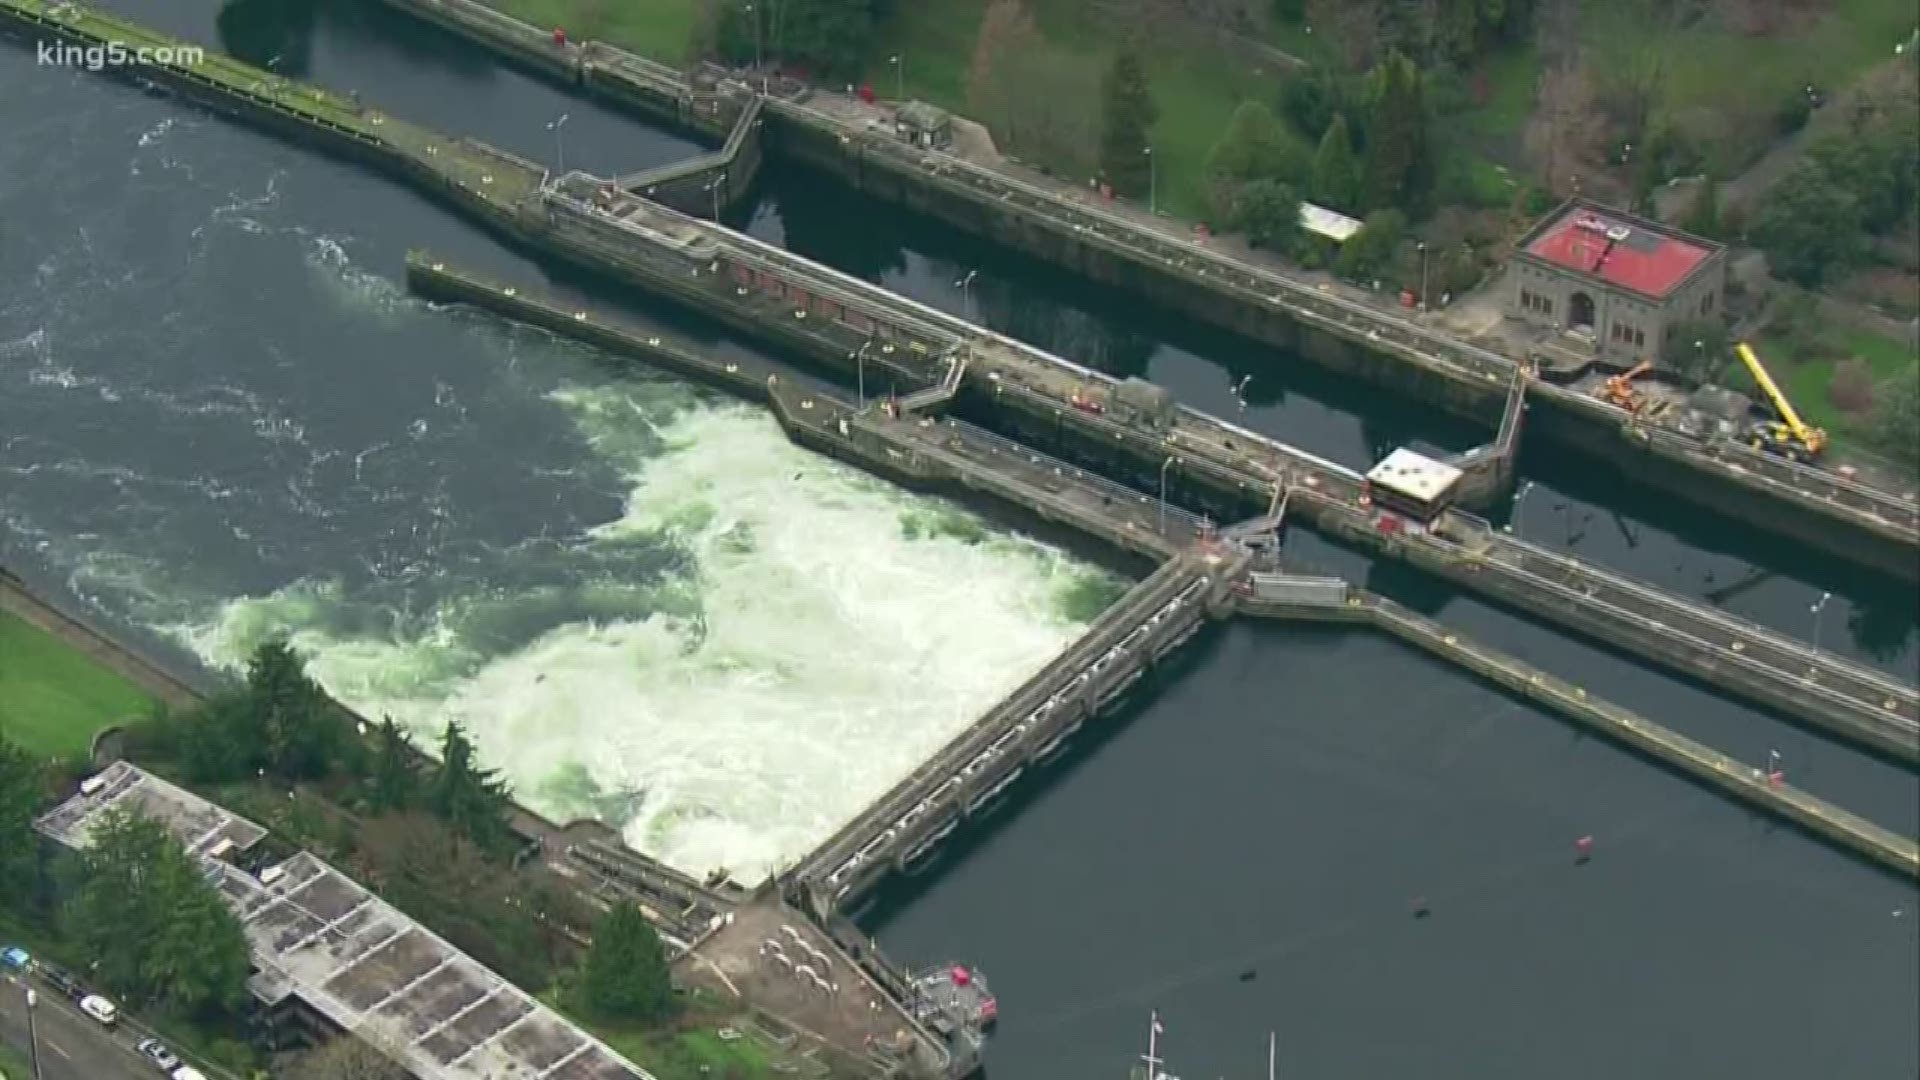 The US army corps of engineers confirmed the Ballard Locks had the highest water flow on record, which dates back 74 years.